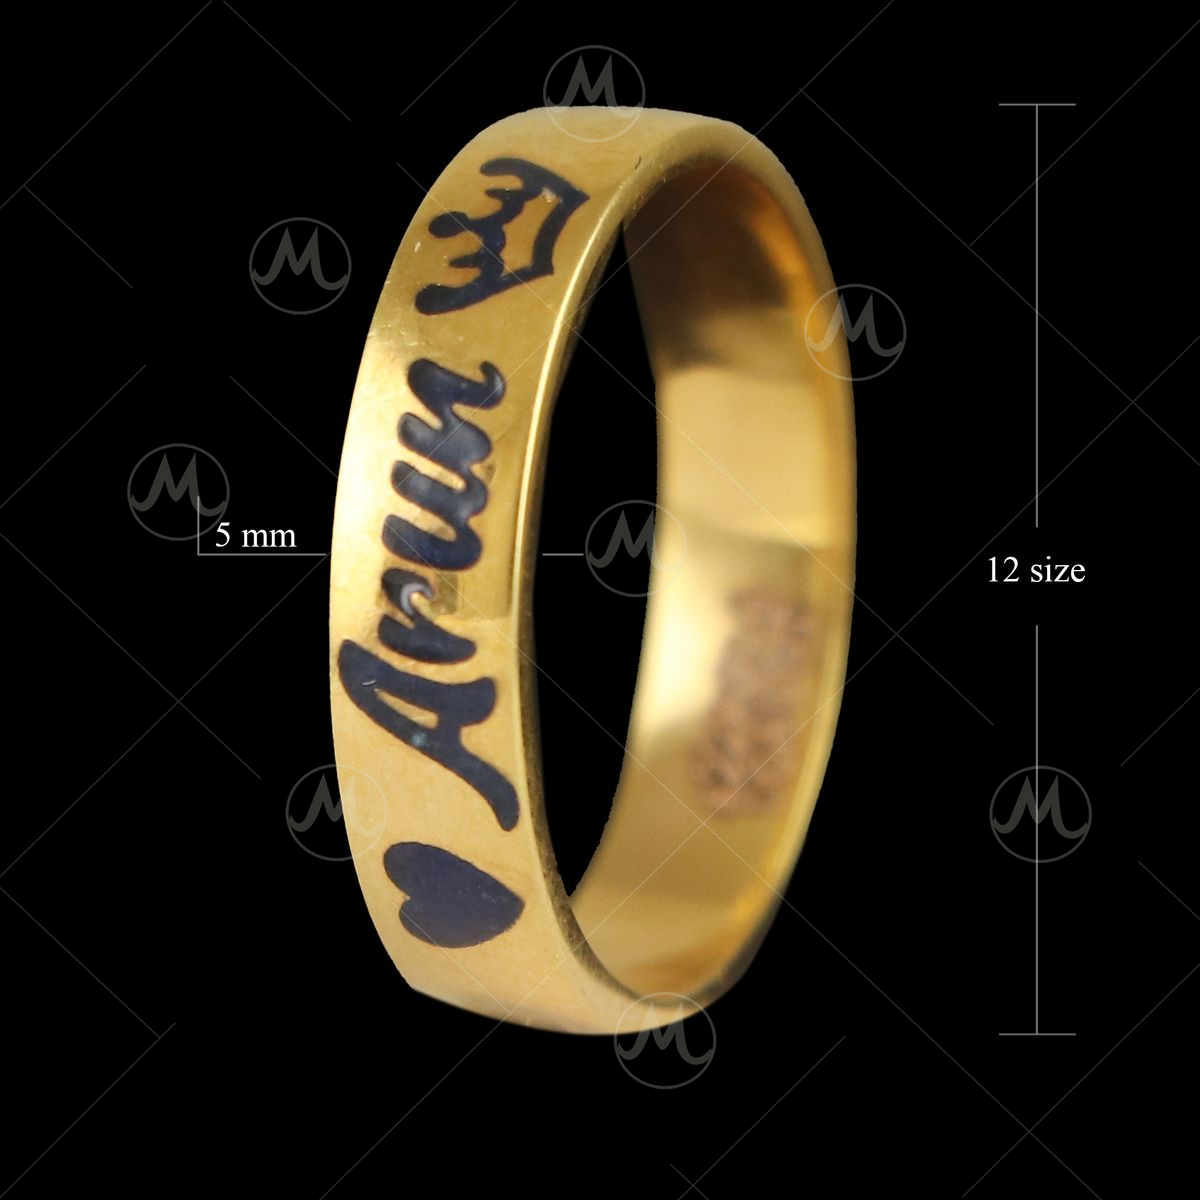 Customized Name Ring With Heart -